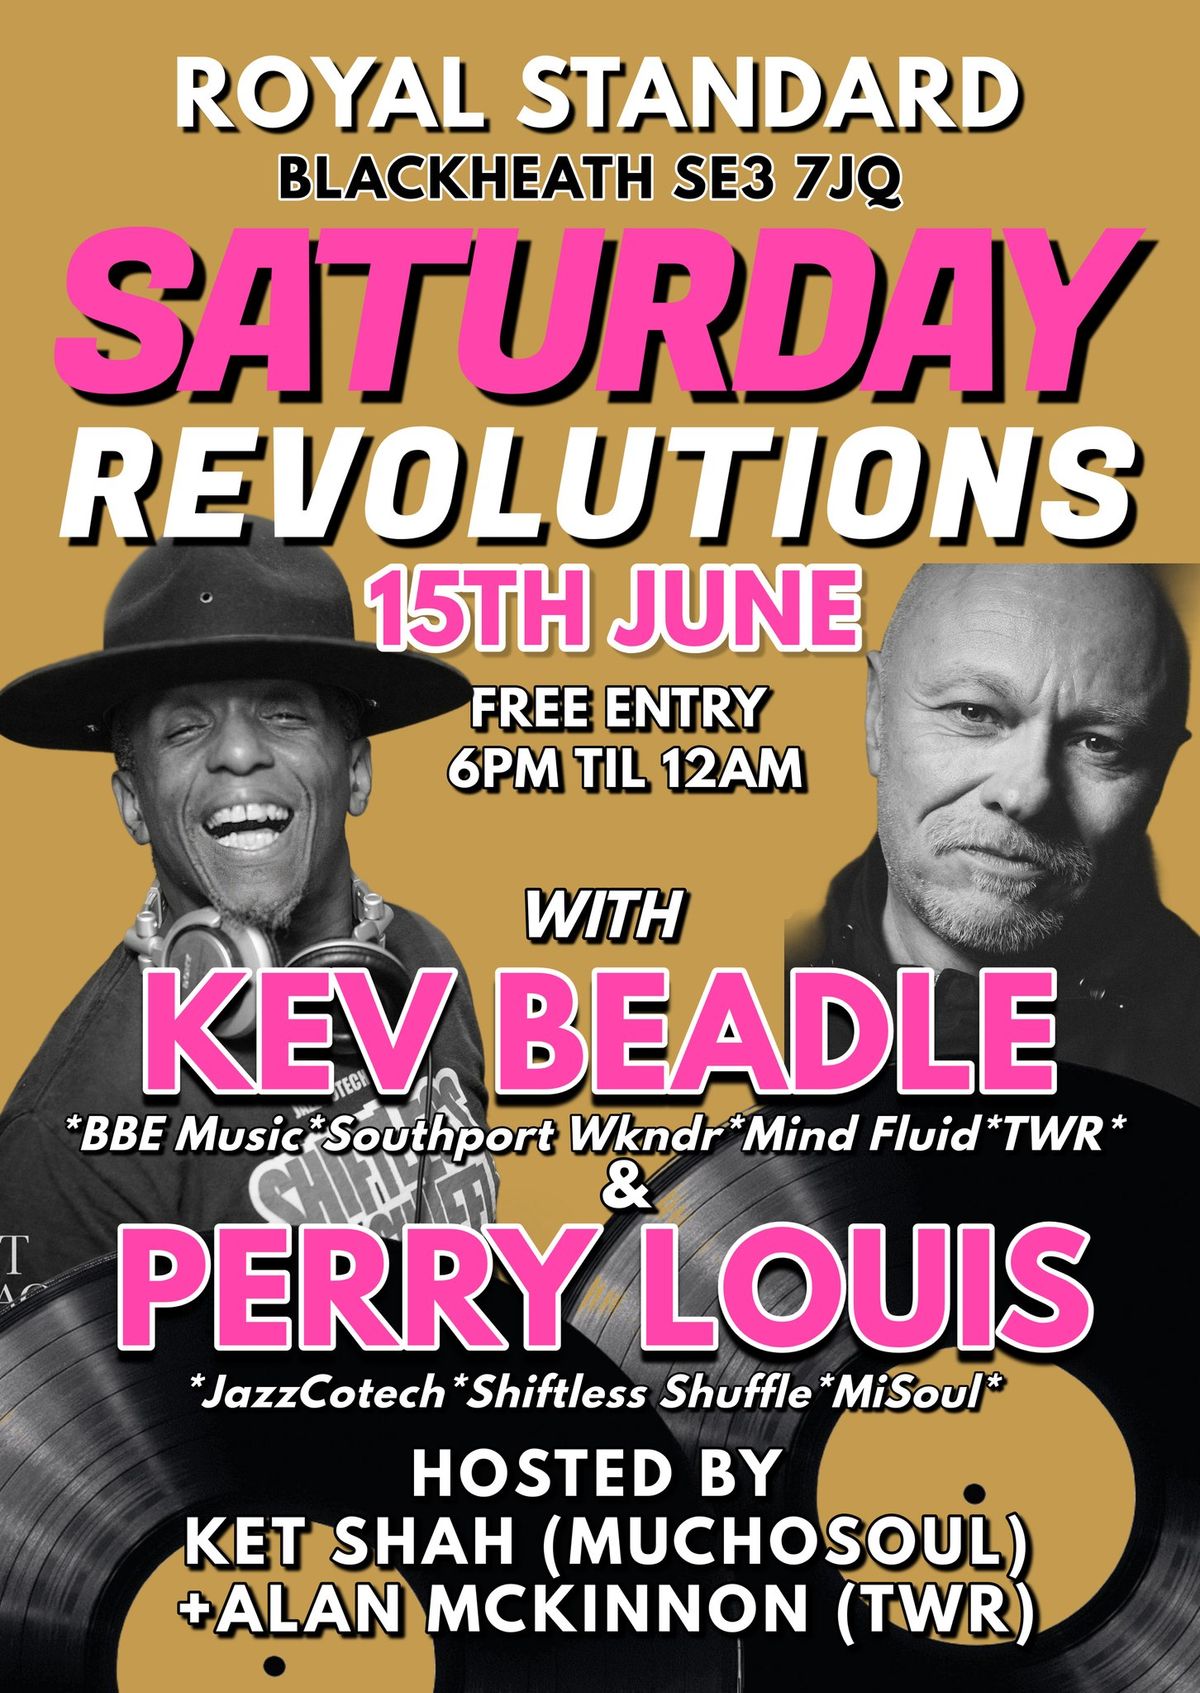 SATURDAY REVOLUTION Summer party with Kev Beadle & Perry Louis